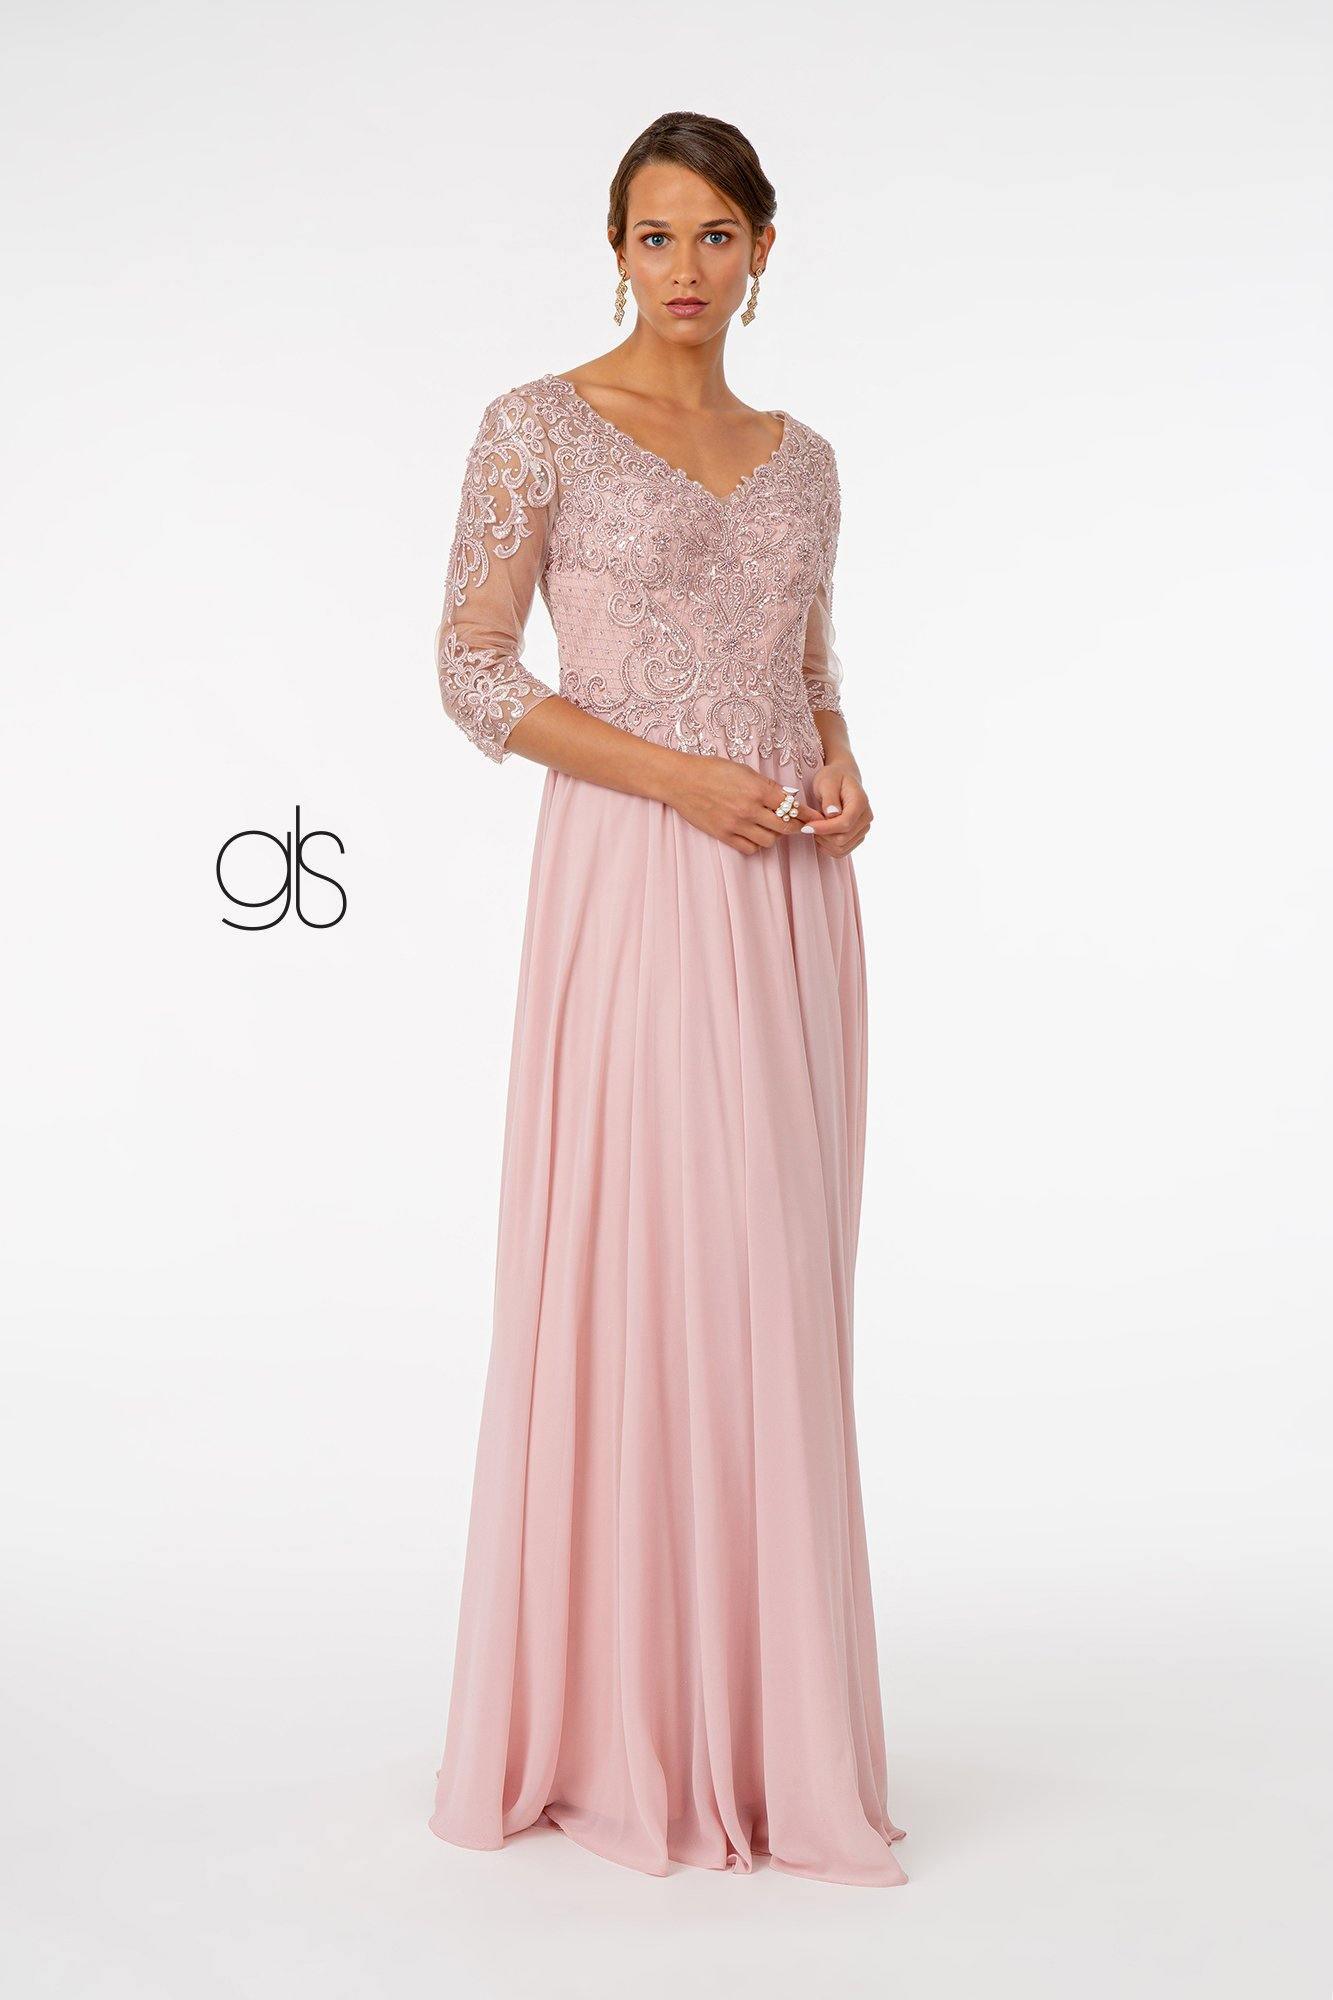 Embroidered Bodice Evening Long Formal Dress Sale - The Dress Outlet